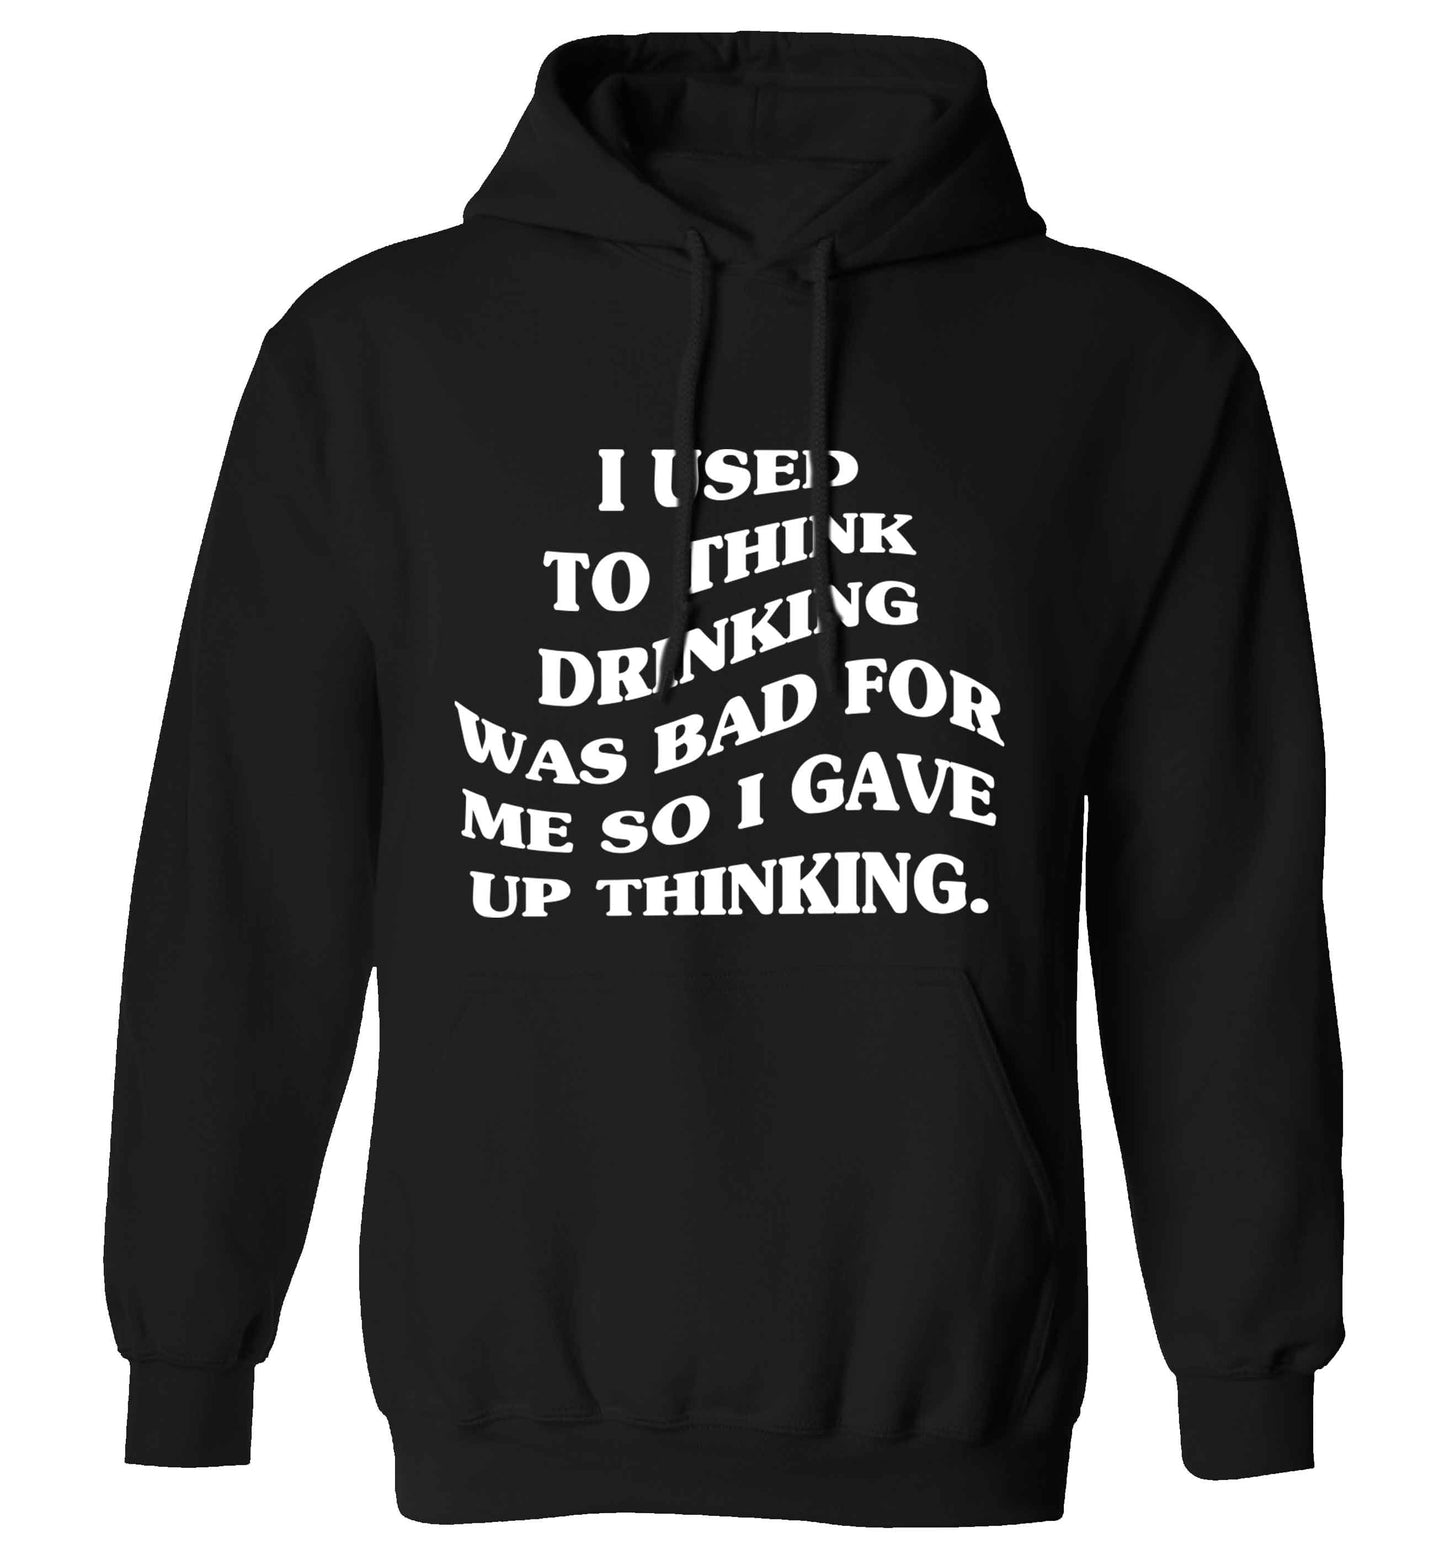 I used to think drinking was bad so I gave up thinking adults unisex black hoodie 2XL